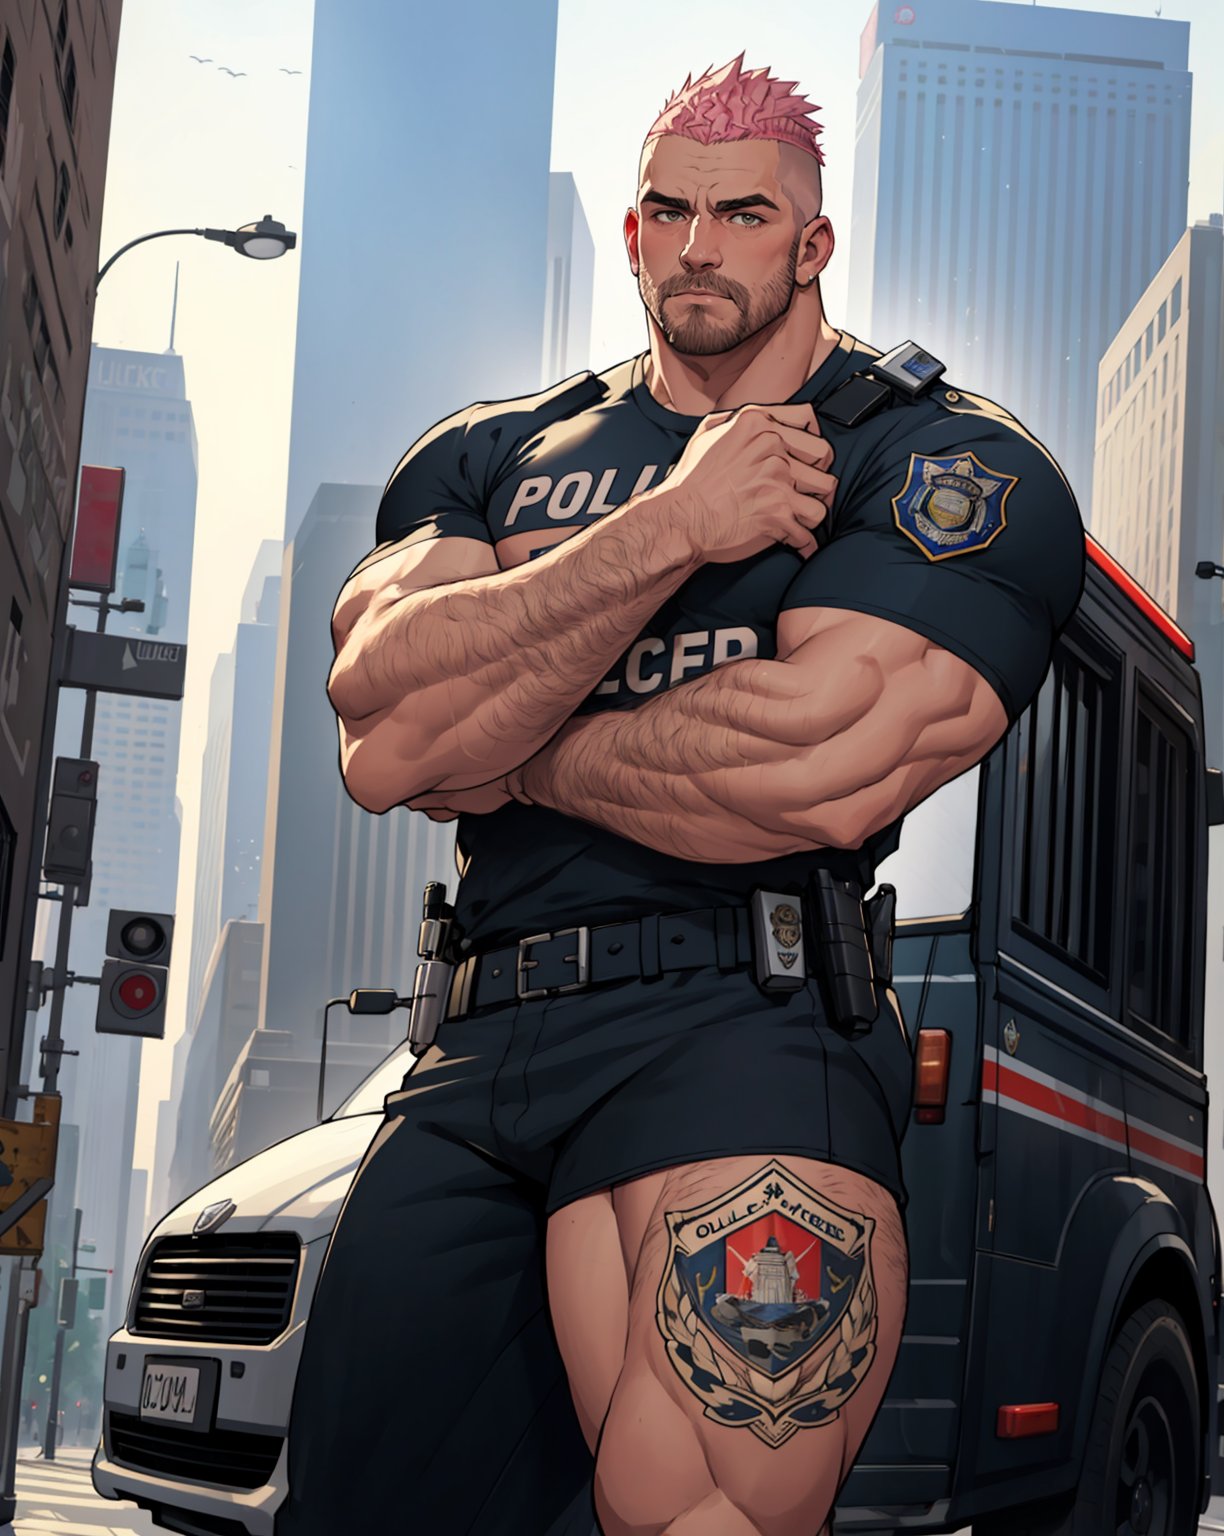 Best Quality, Masterpiece, Ultra High Resolution, Detailed Background, Muscular Man, Shaved Hair, Punk Crest, Arm Hair, Thick Chunky Arms, Thick Thighs, Naked, Hairy, Police Officer Outfit, police t-shirt, big lump, police car in the background, New York background, 4k resolution